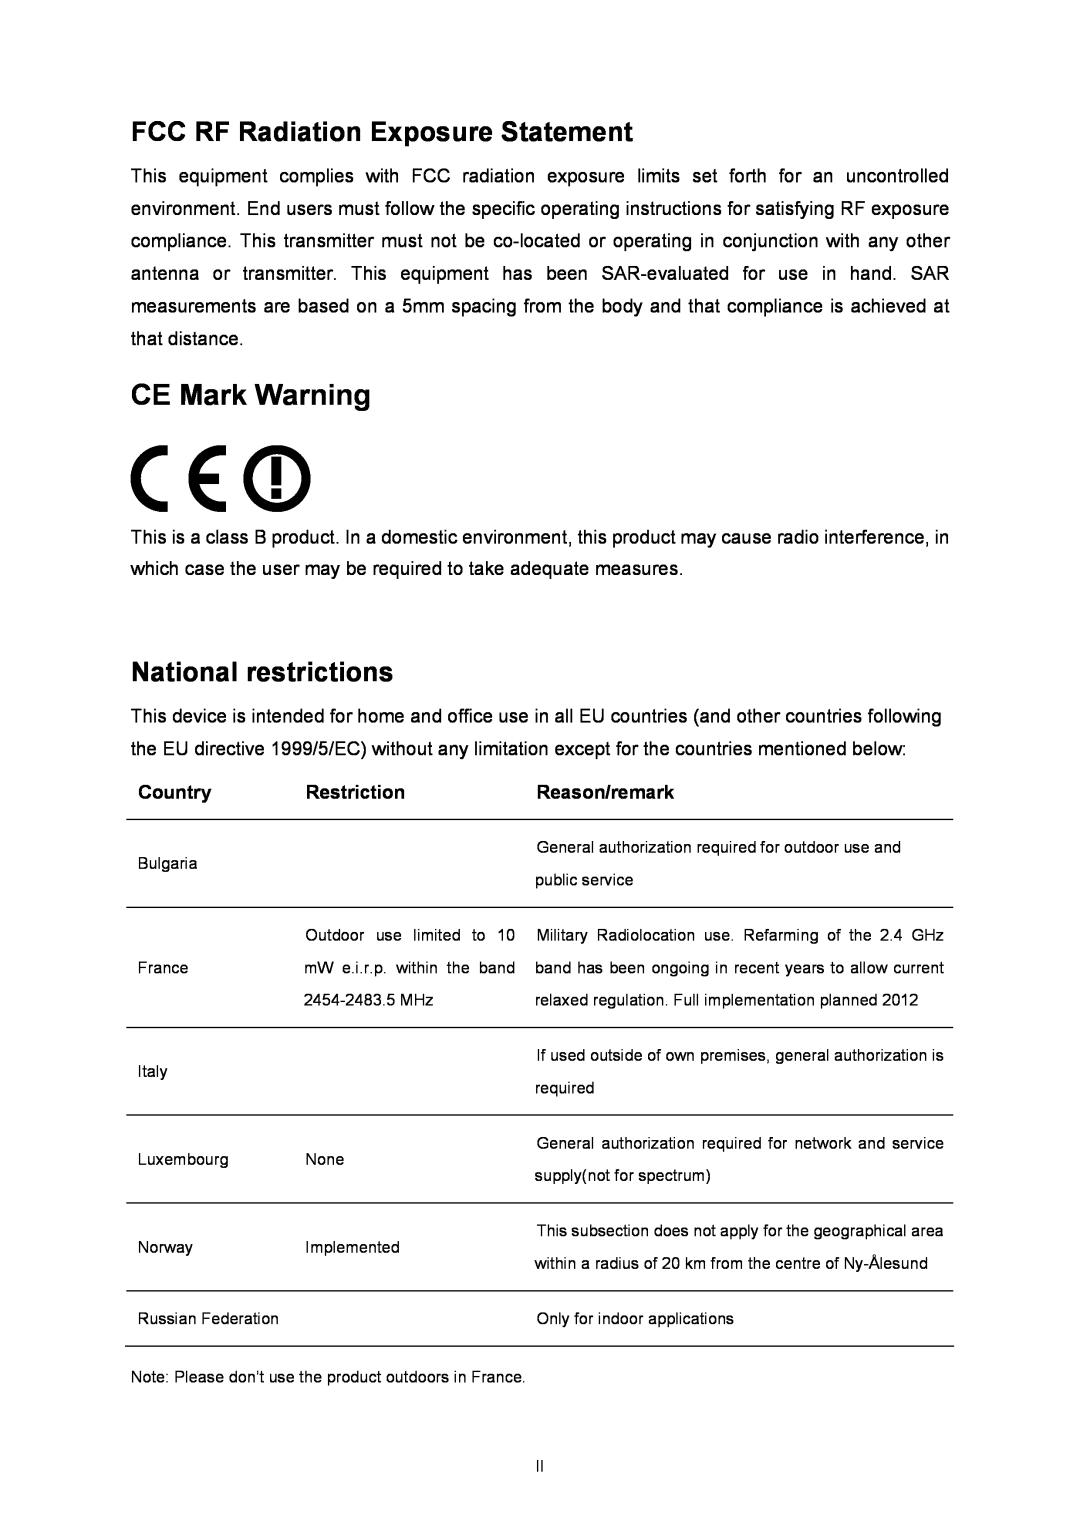 TP-Link TL-WN7200N manual CE Mark Warning, FCC RF Radiation Exposure Statement, National restrictions 